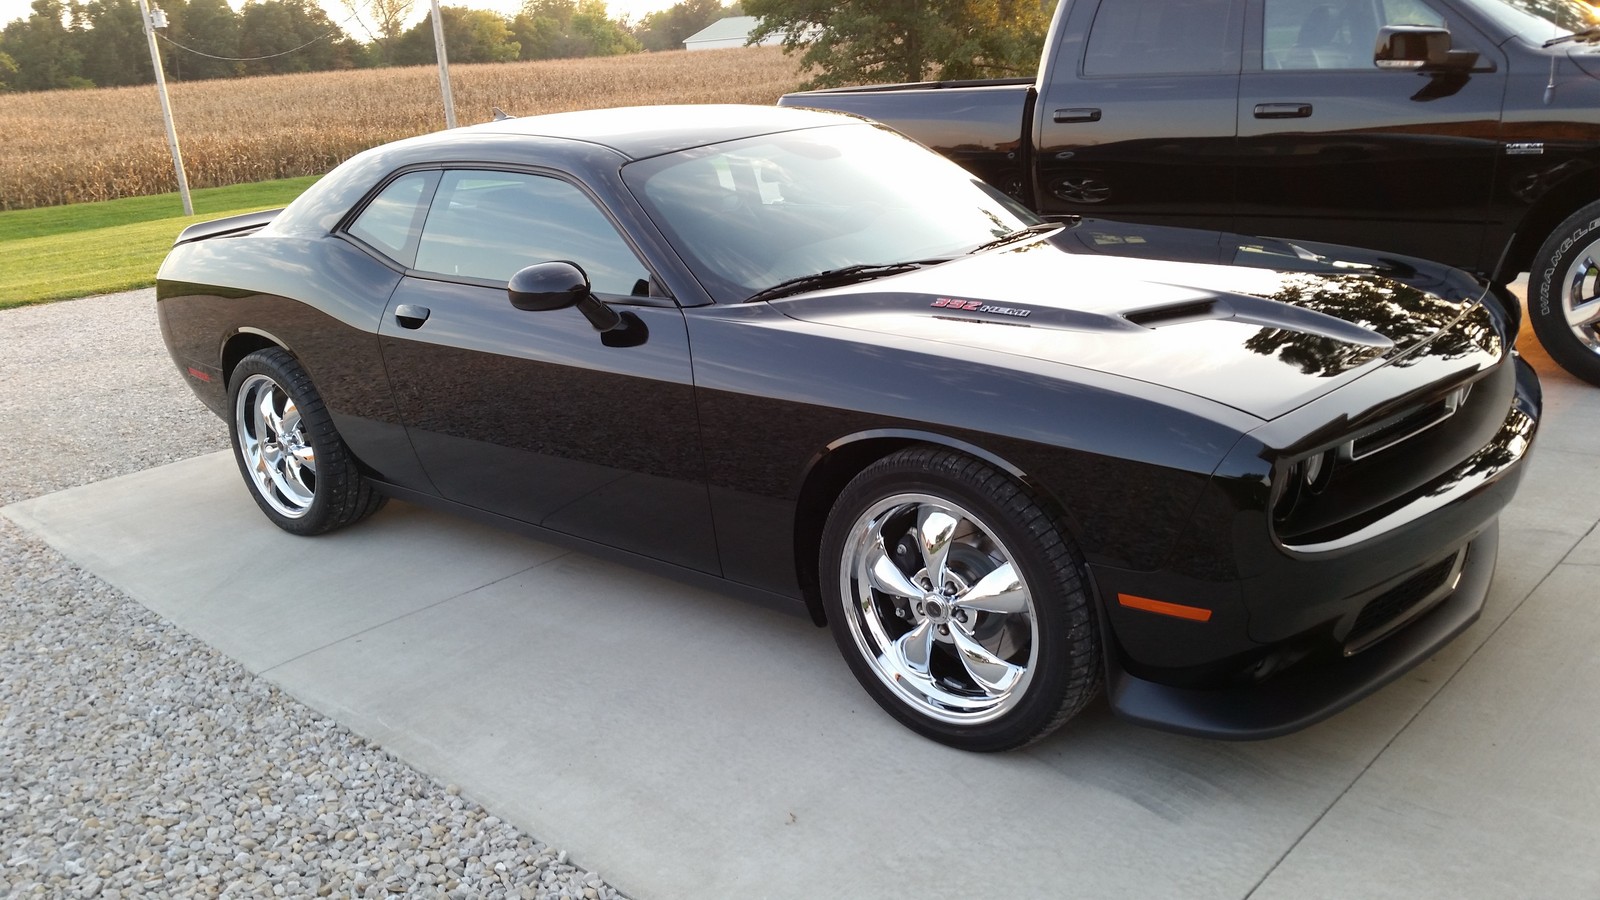 Videos Mods Or Upgrades To This Dodge Challenger Srt8 Scat Pack